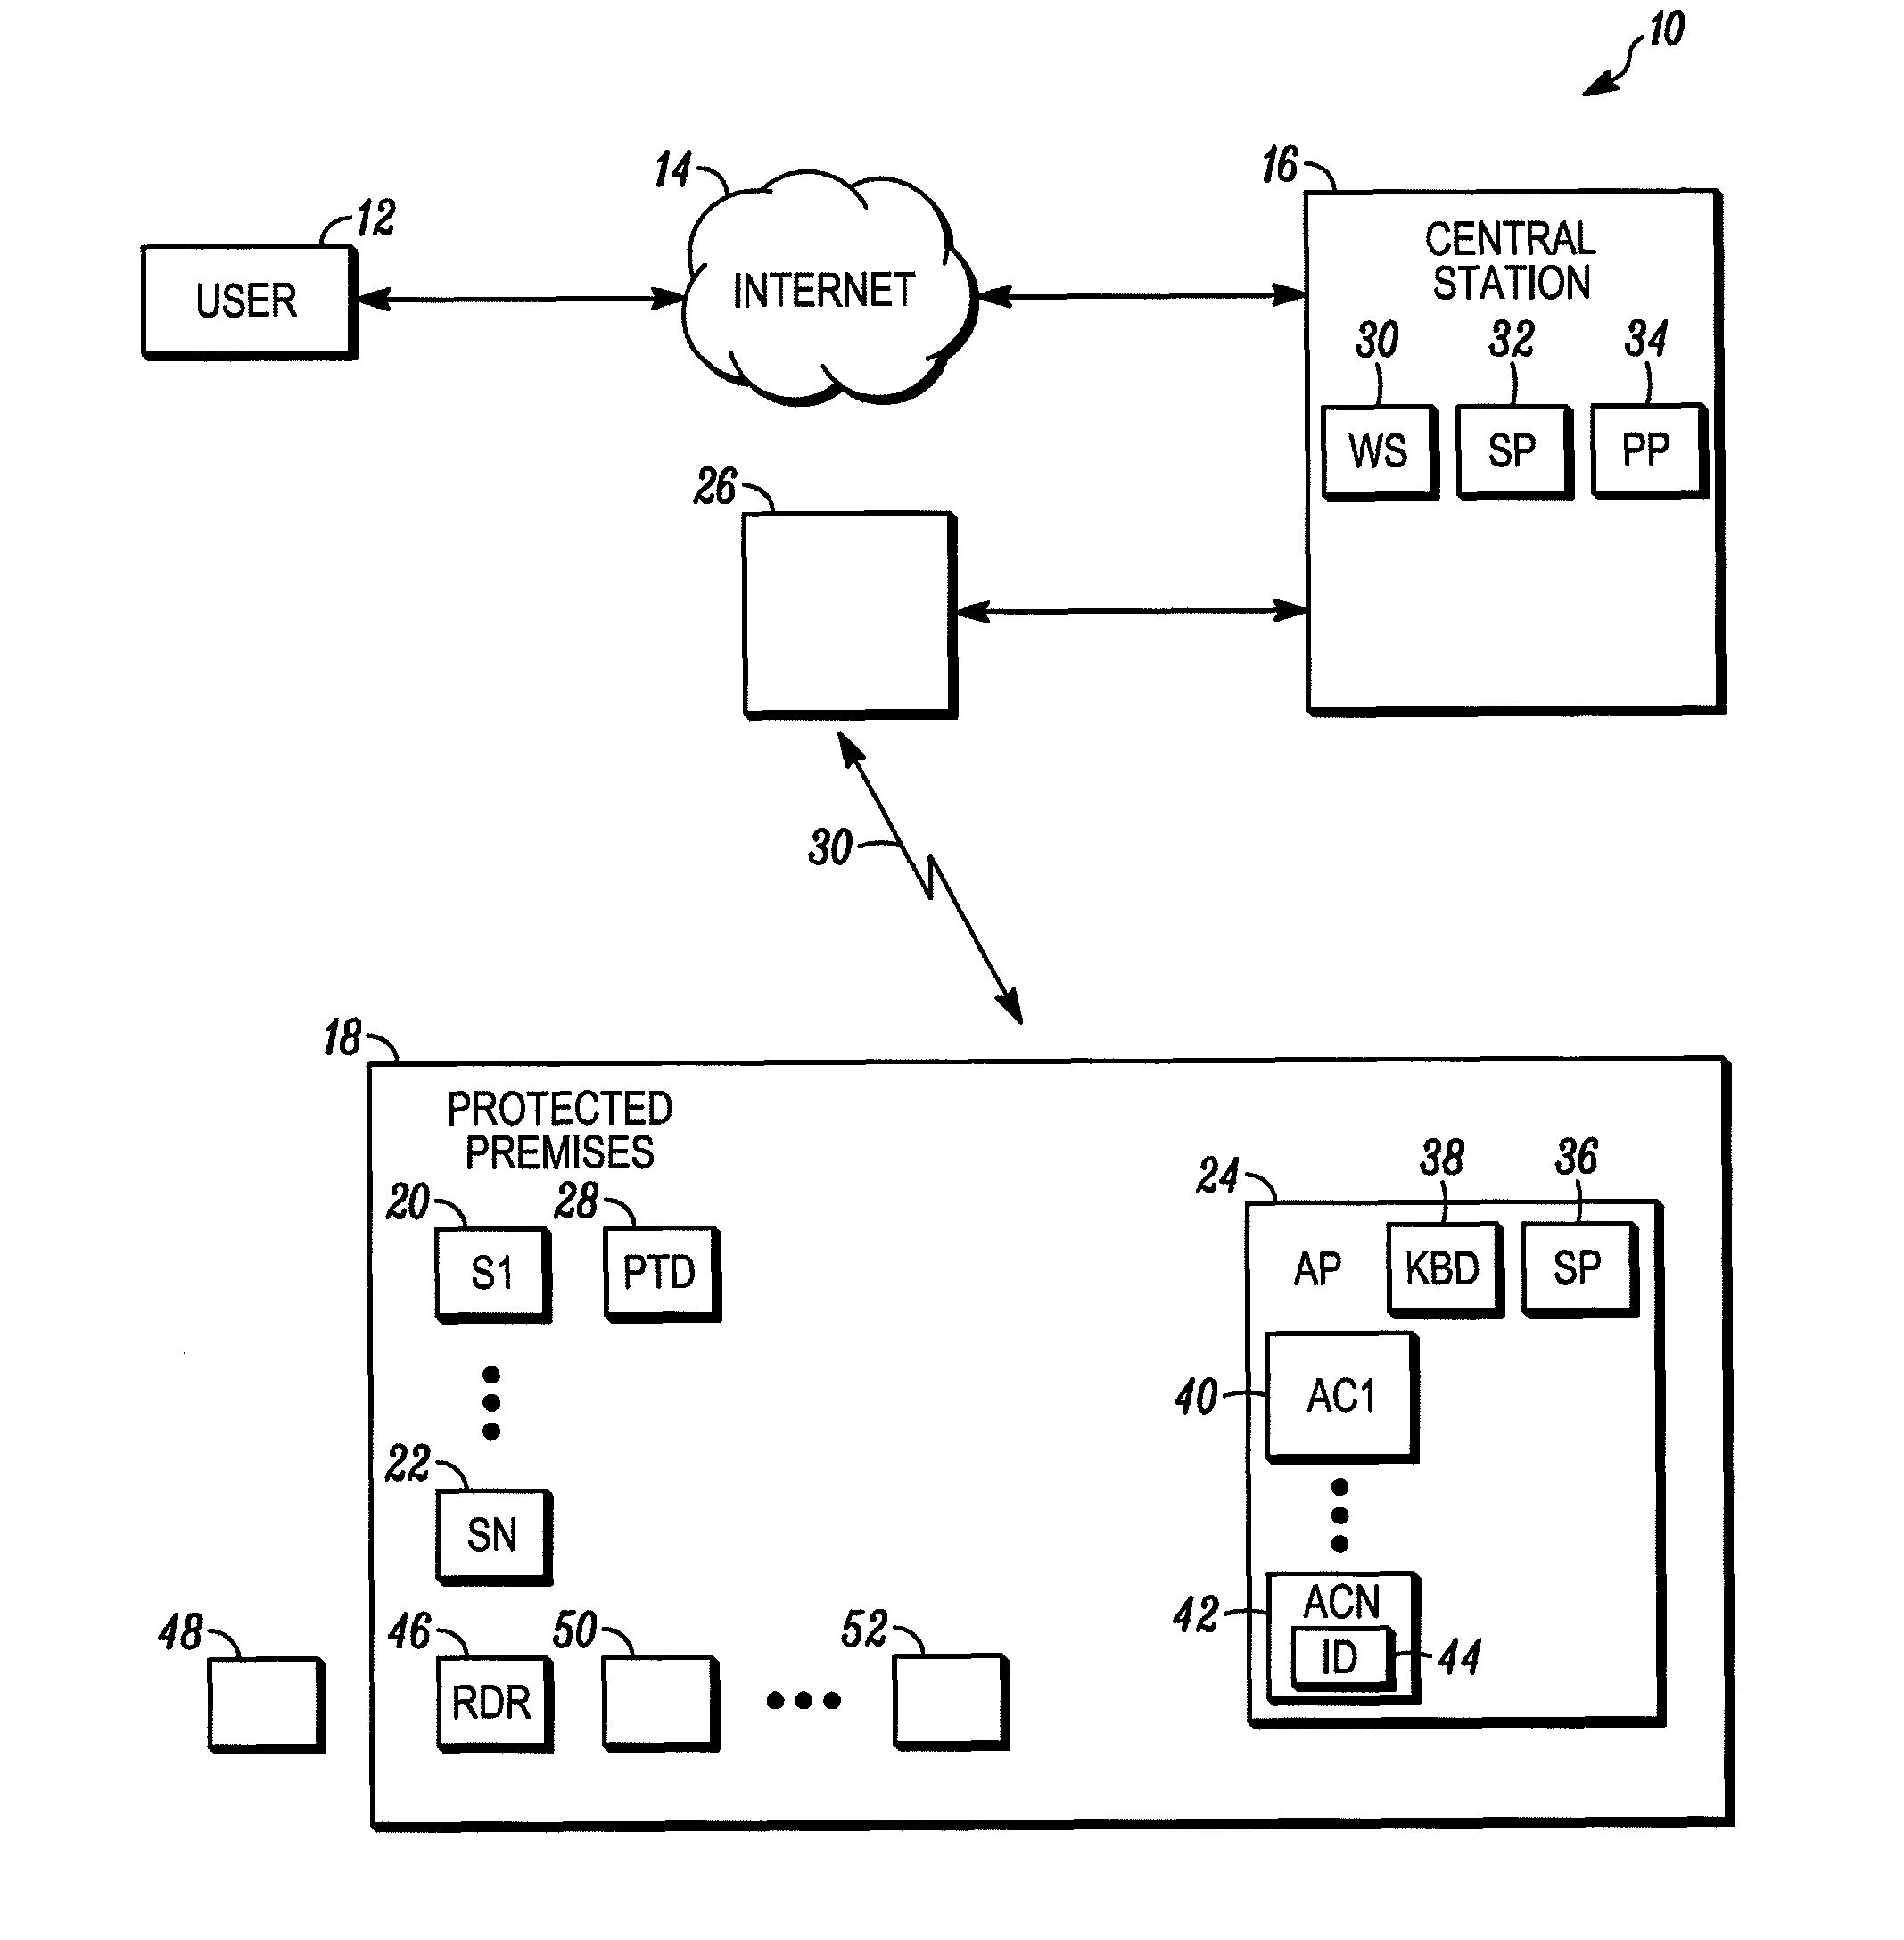 Method and apparatus for interrogation of a security system